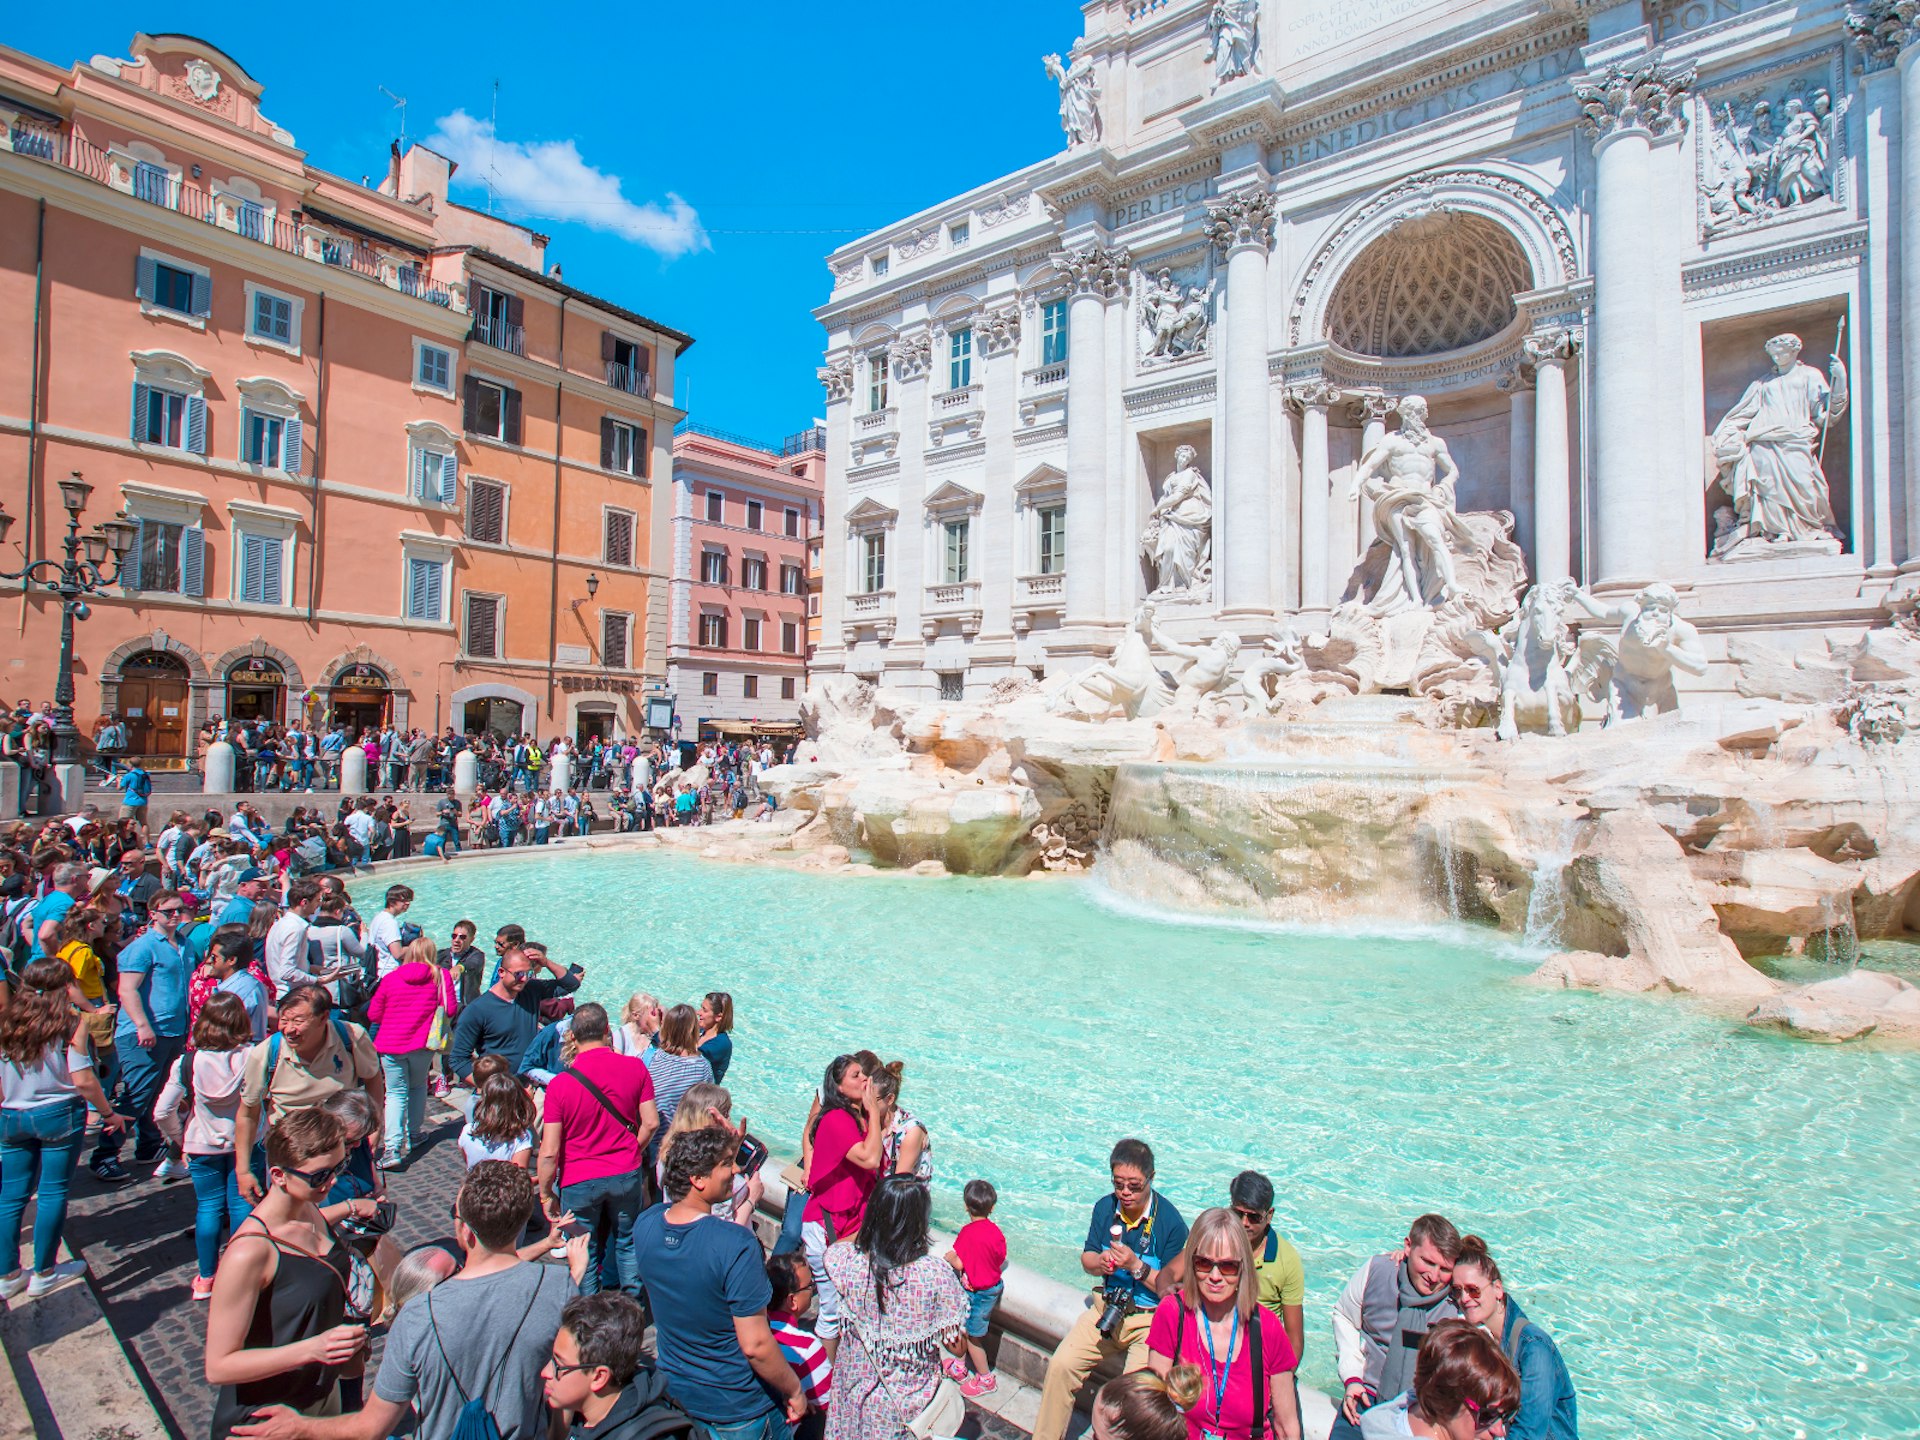 Crowds of tourists around the Trevi Fountain, Rome